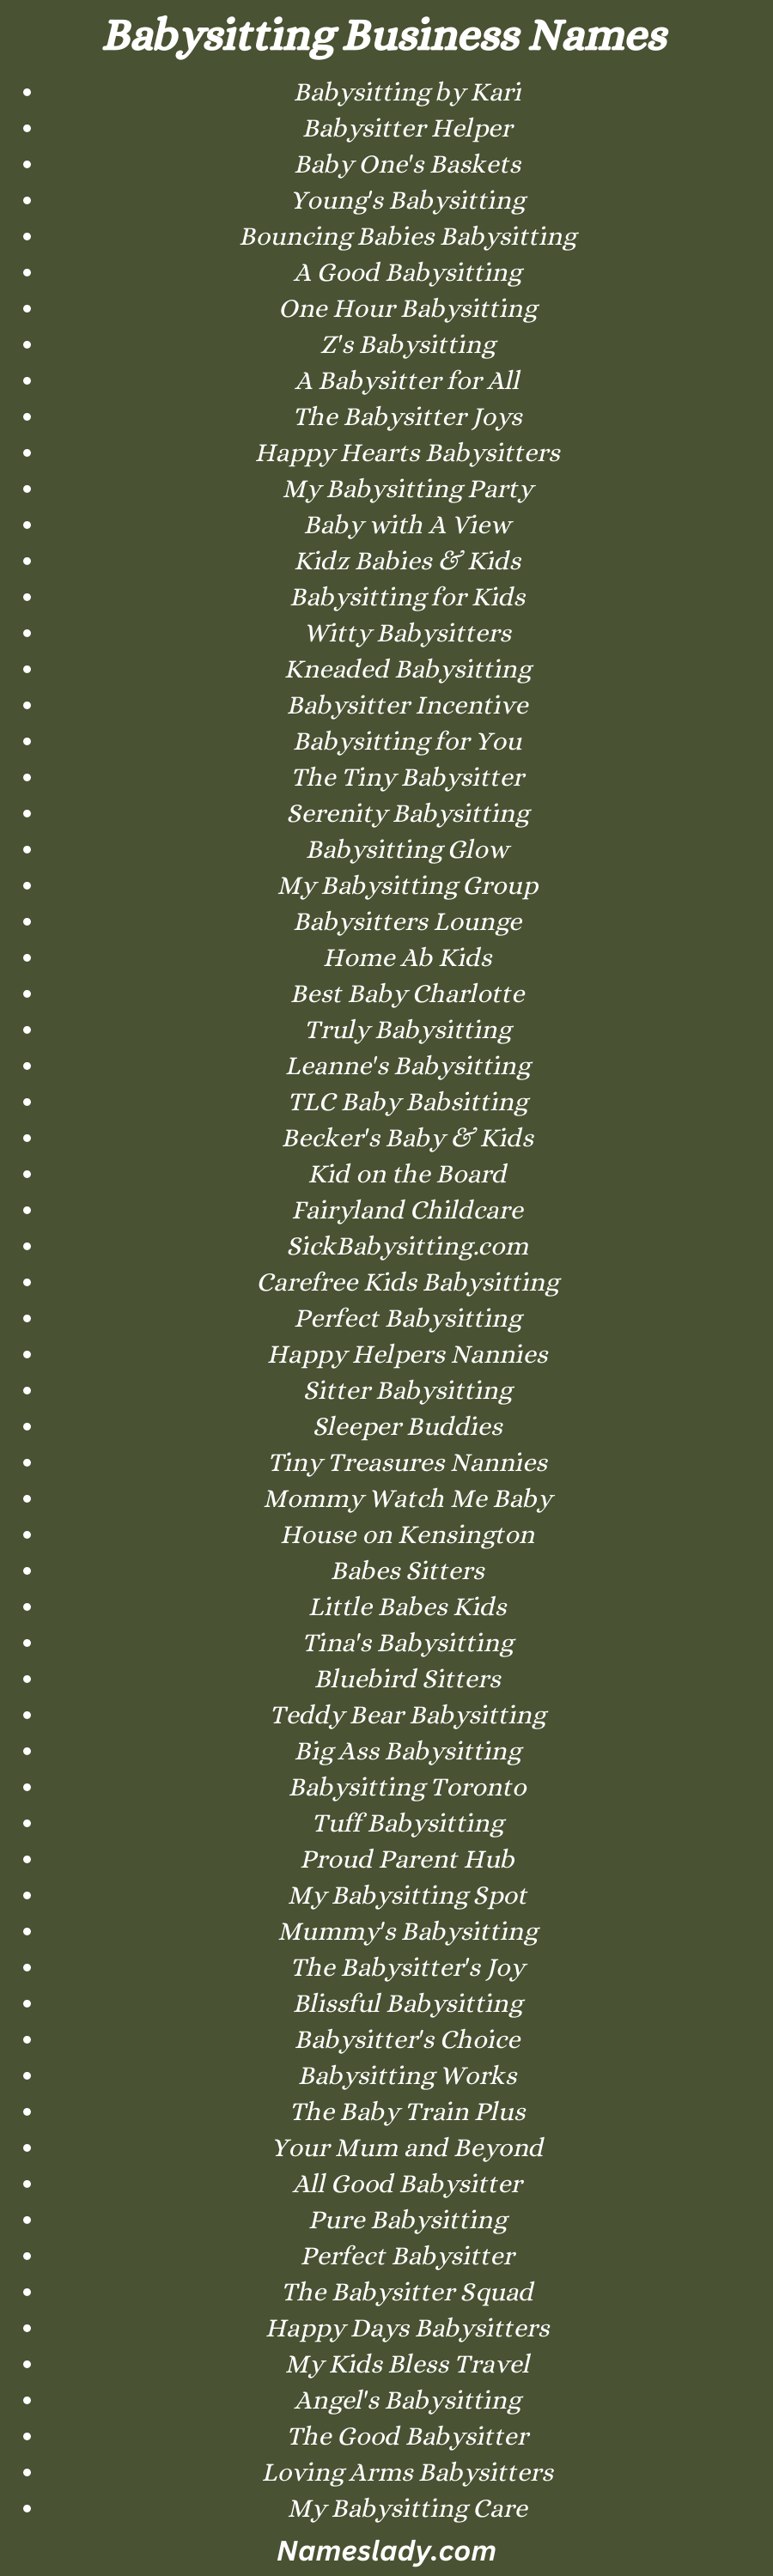 700 Unique Babysitting Business Names to Inspire You - NamesLady